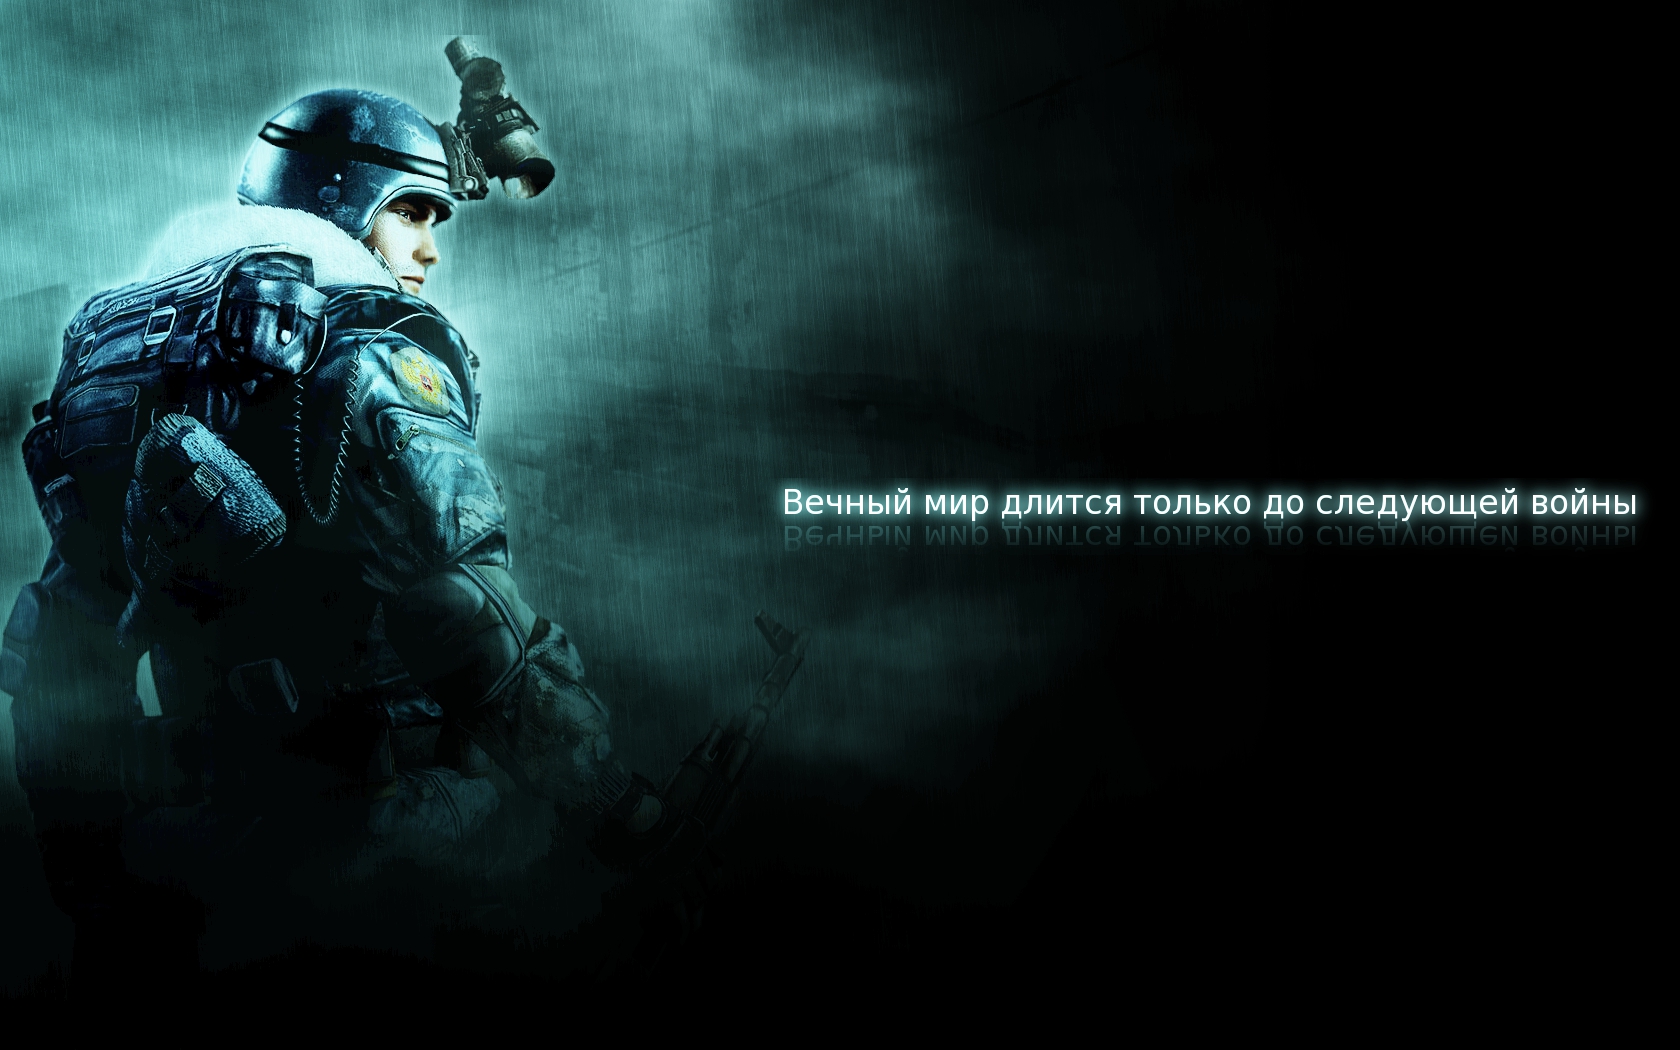 Wallpaper A V Russian By Errno X